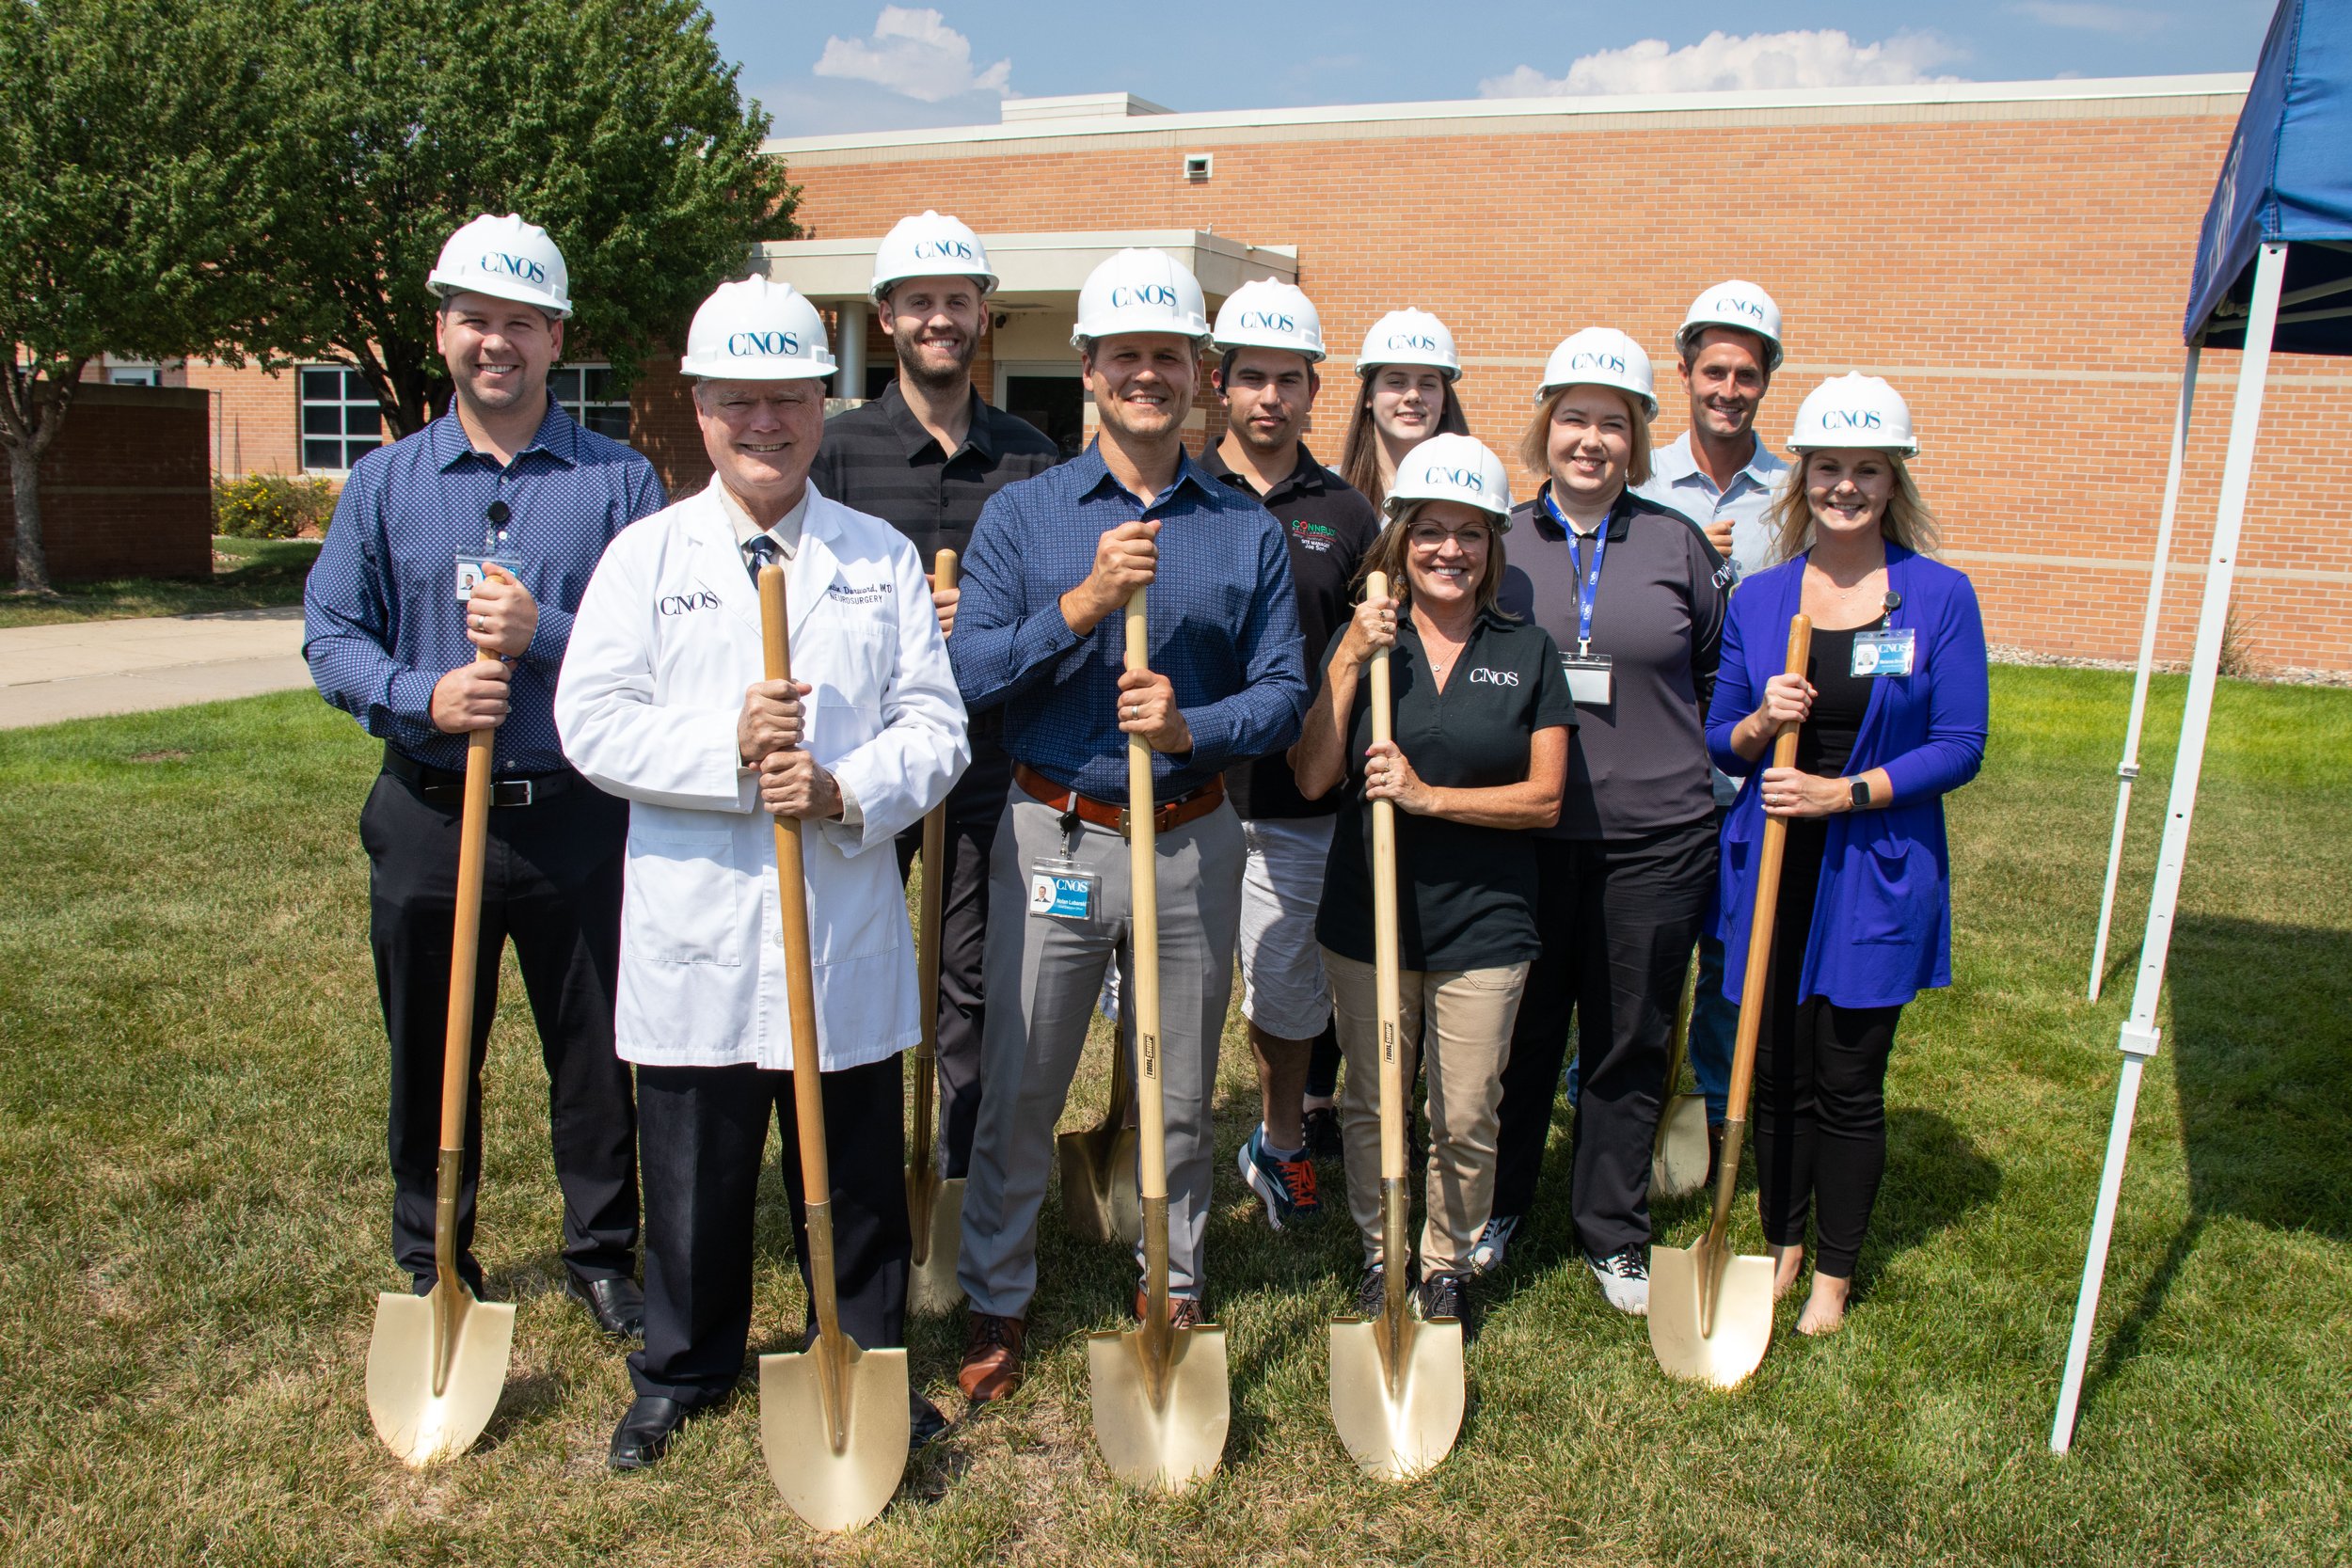 CNOS breaks ground on a 6,500 square foot imaging center for the Siouxland community.